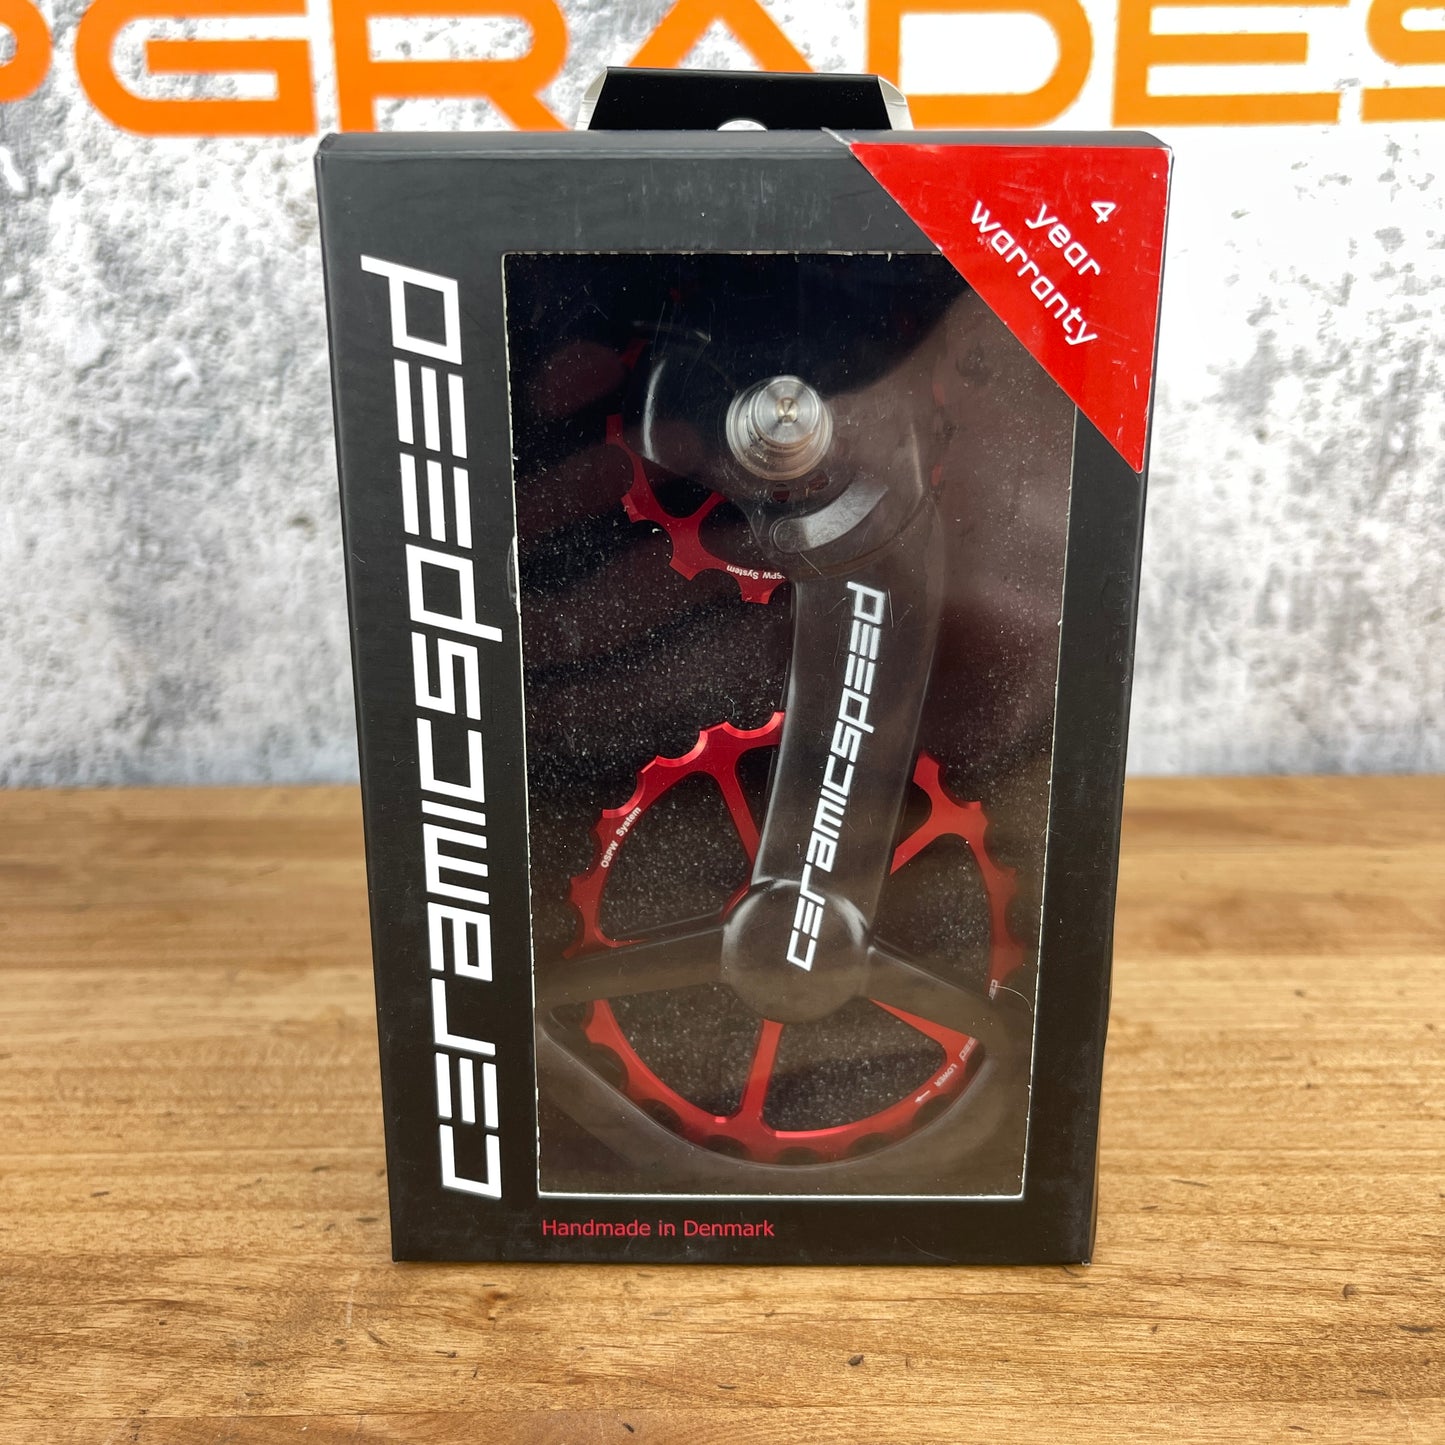 New Takeoff! CeramicSpeed OSPW For 11-Speed Shimano R9100/R9150/R8000 106315